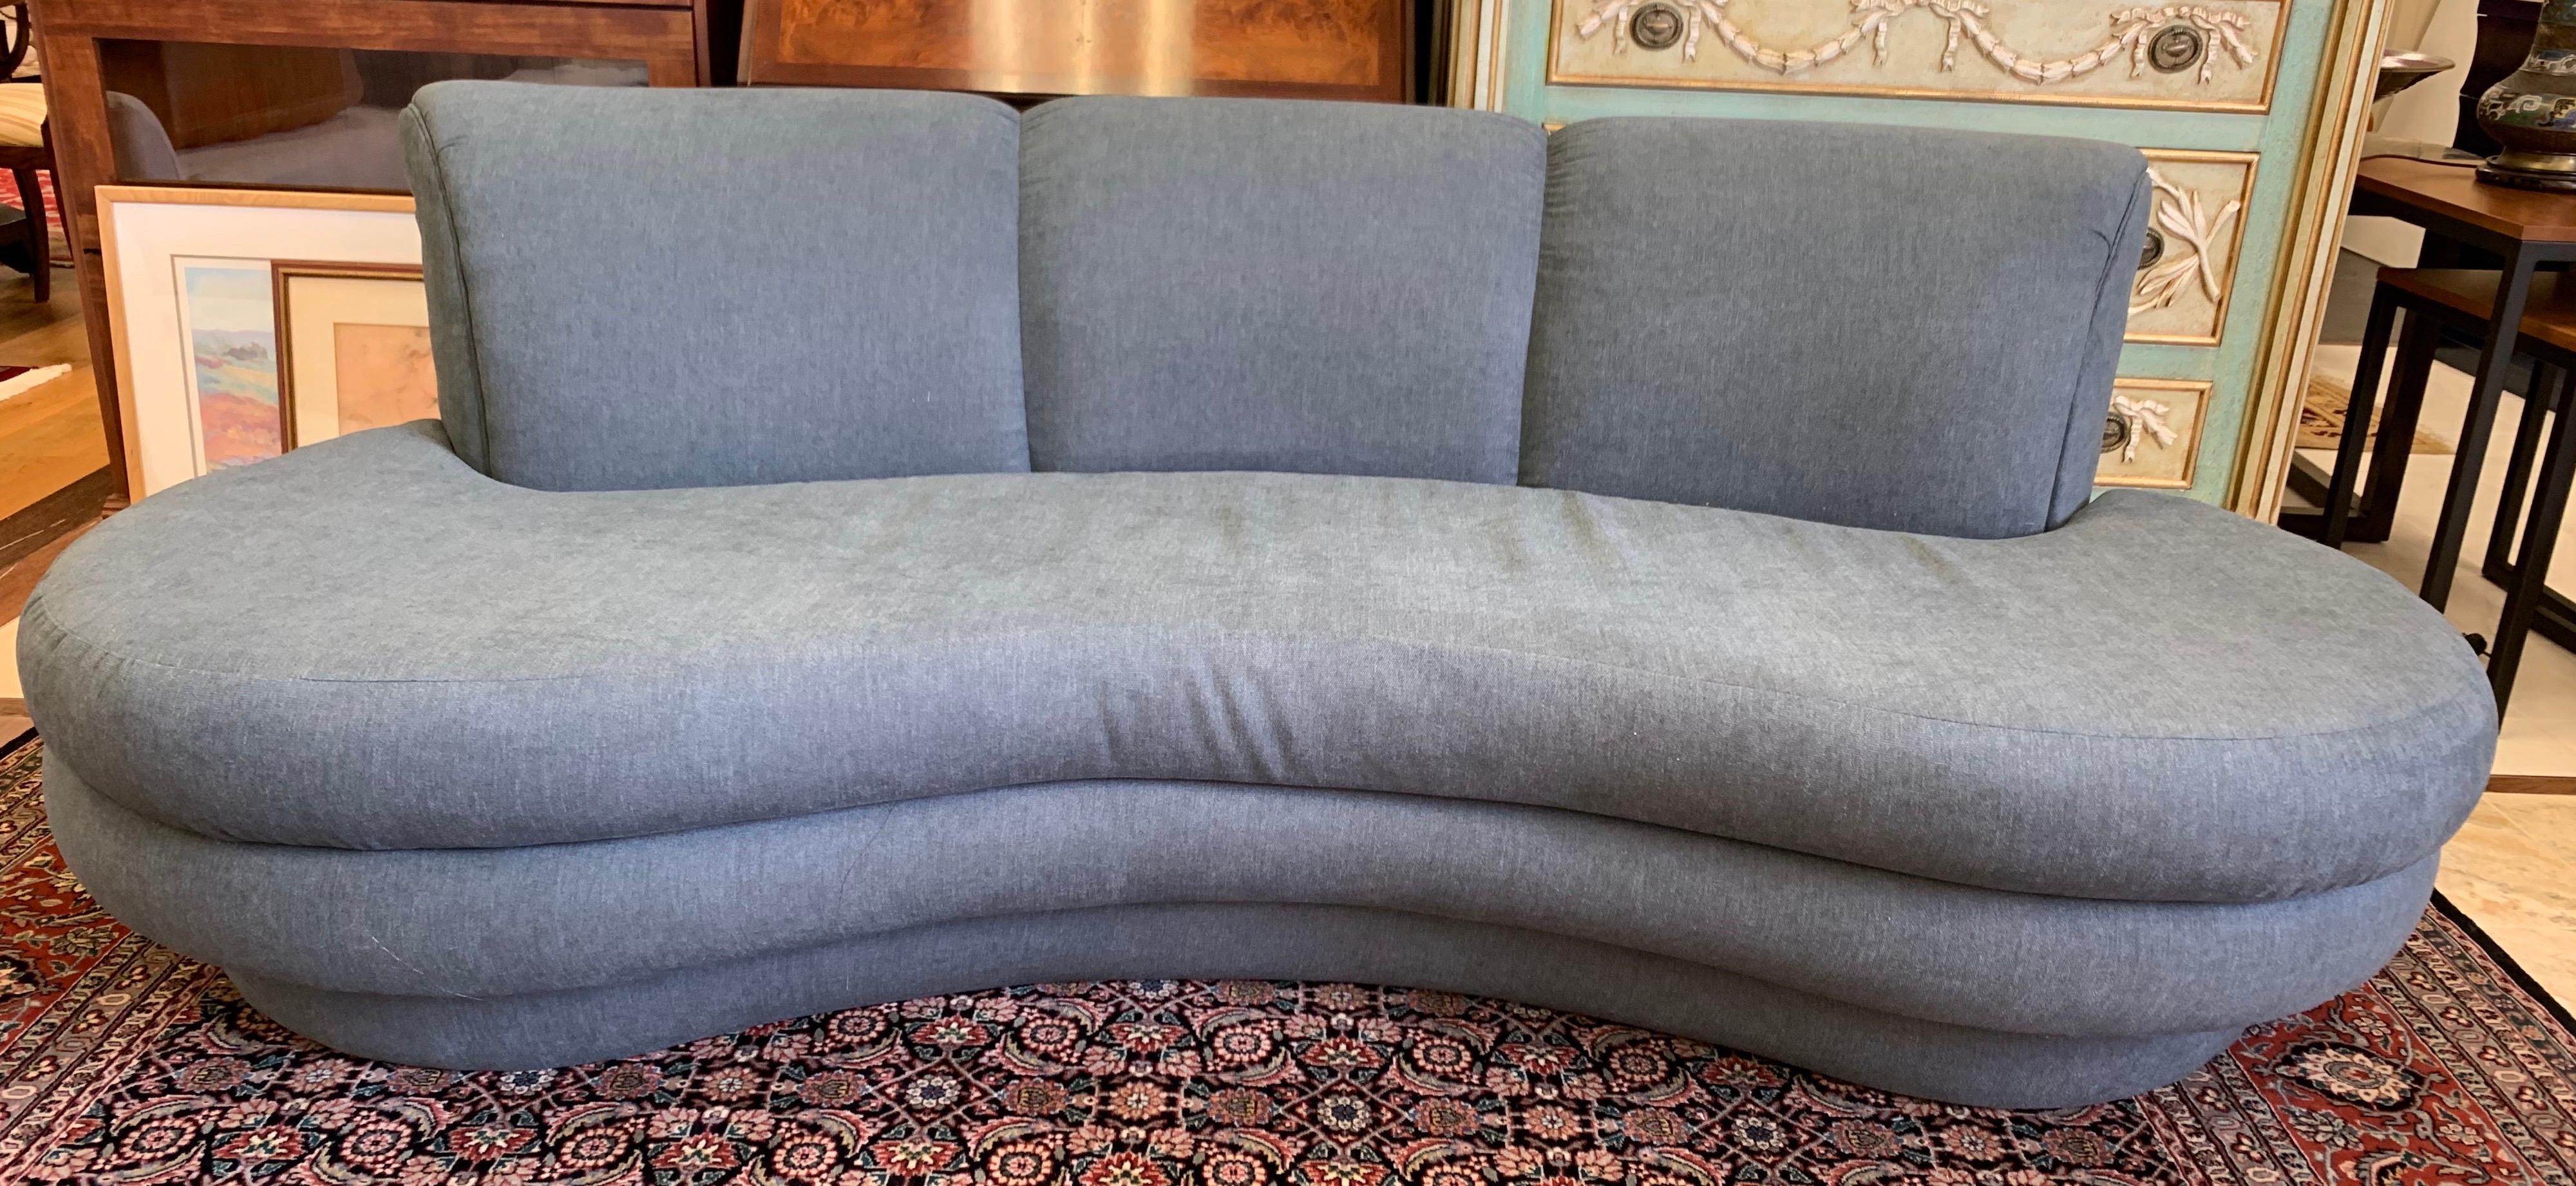 Adrian Pearsall Cloud Sofa for Comfort Designs Newly Upholstered in Slate Gray  9